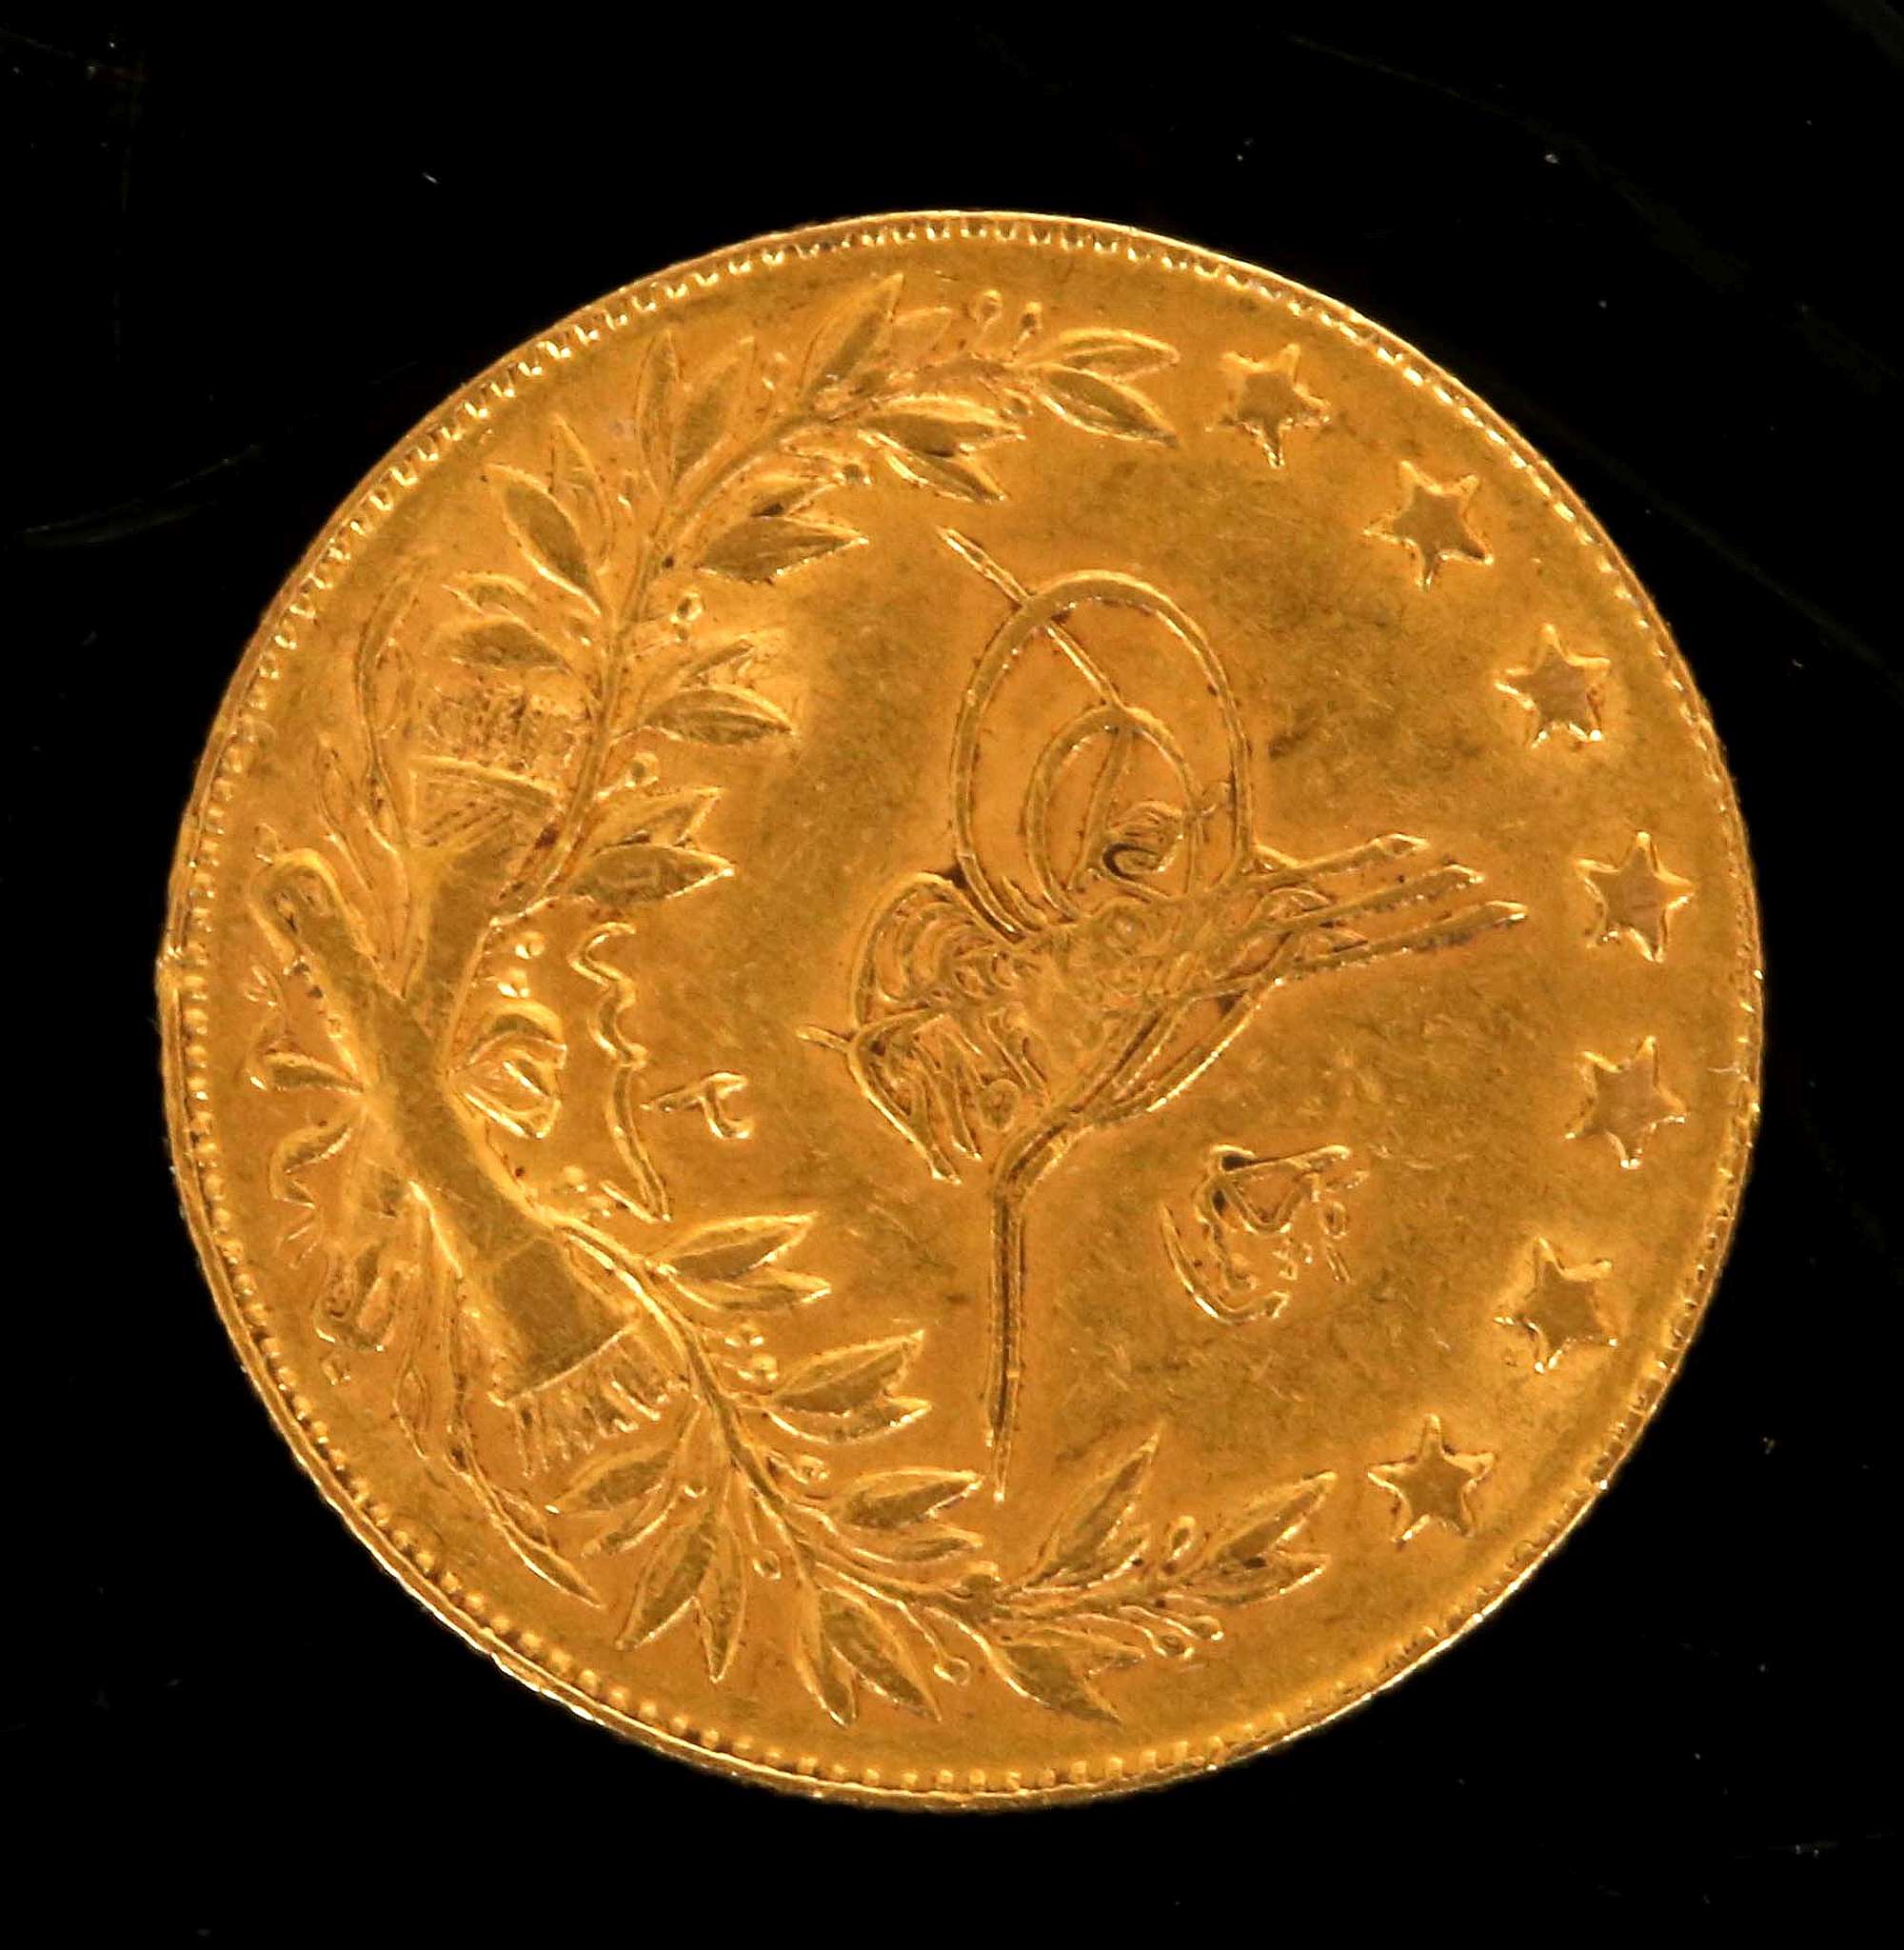 Turkey, a gold 100 Kurus coin 1867-70, obverse El-Ghazt at right of Toughra, reverse script within